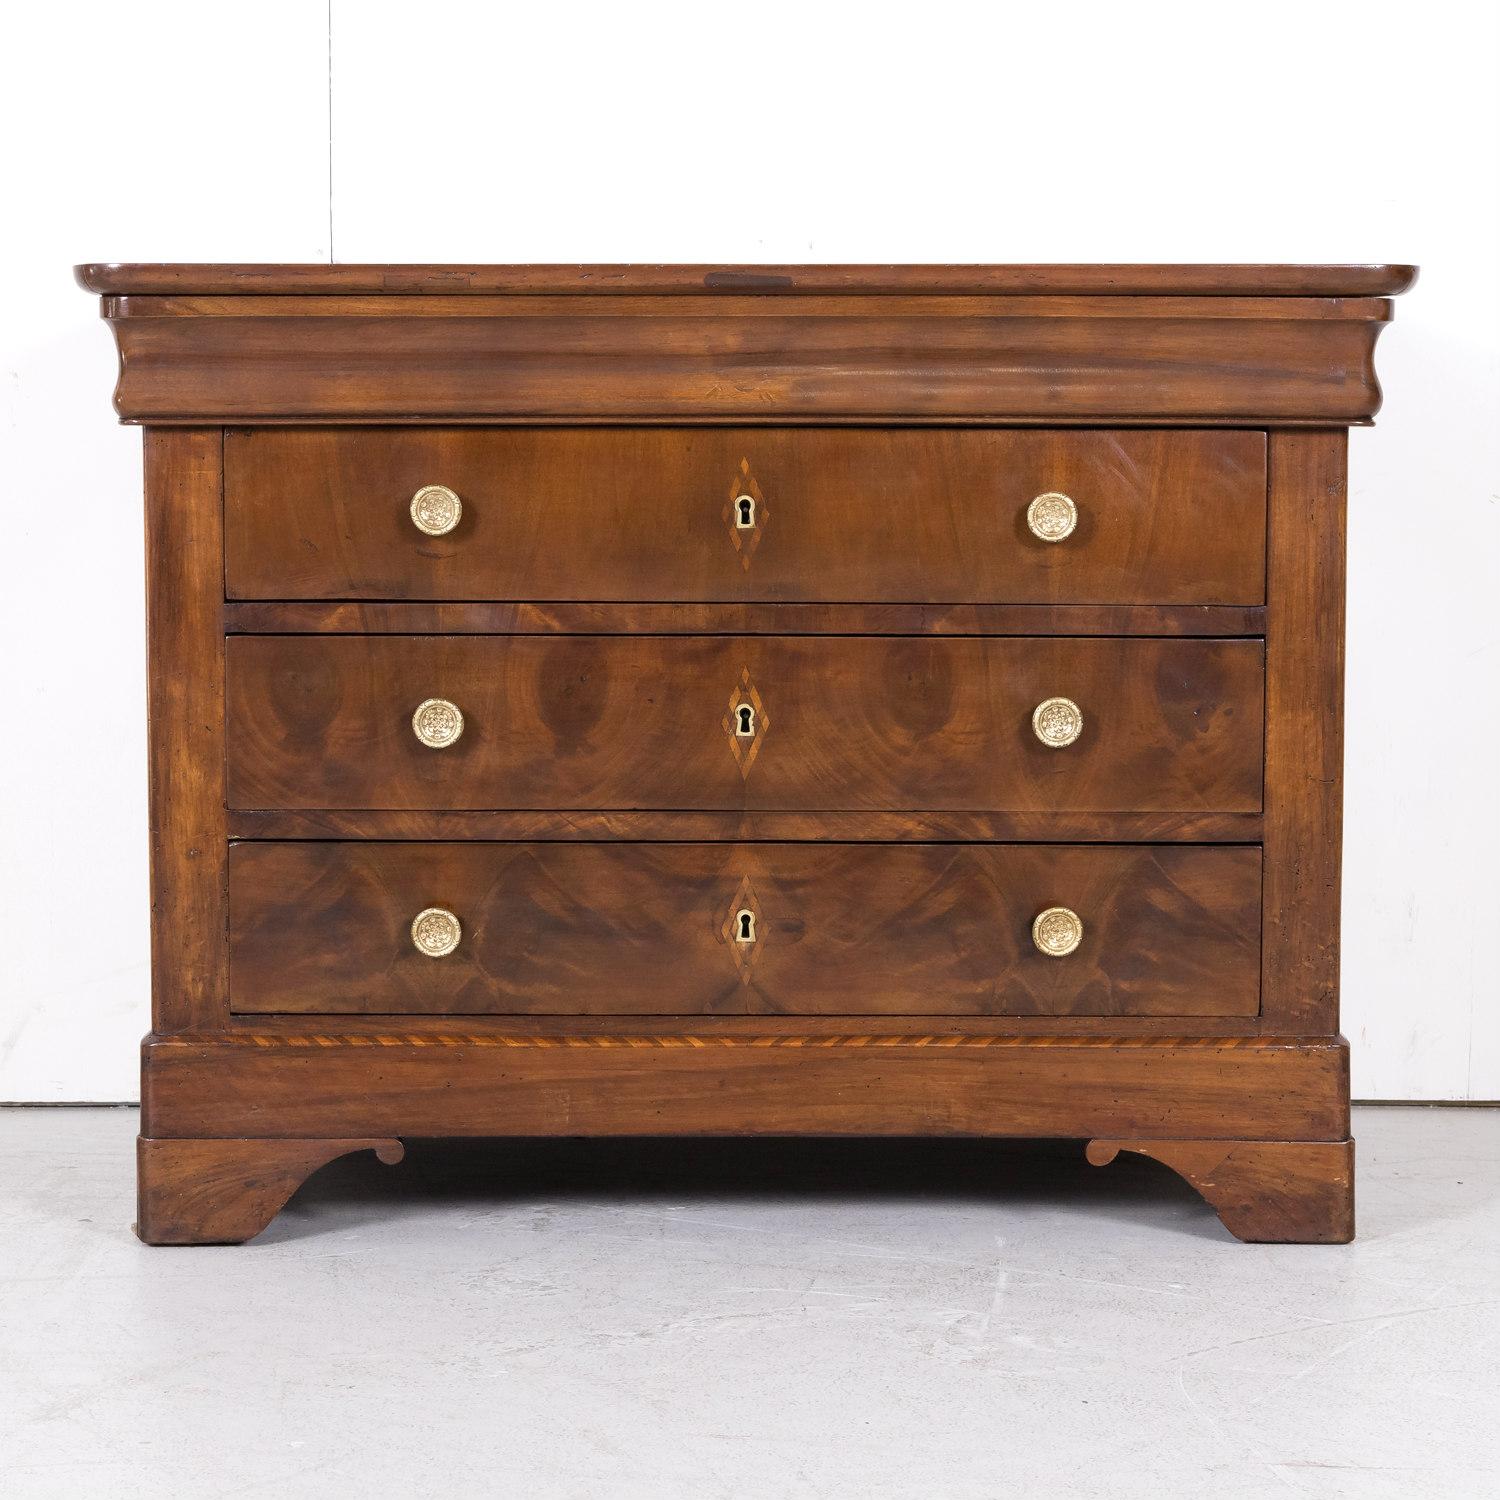 An exceptional 19th century French Louis Philippe period commode, circa 1840s, handcrafted in Lyon of walnut and fruitwood parquetry with a bookmatched front. This fine chest of drawers features a hidden doucine top drawer and three drawers below,